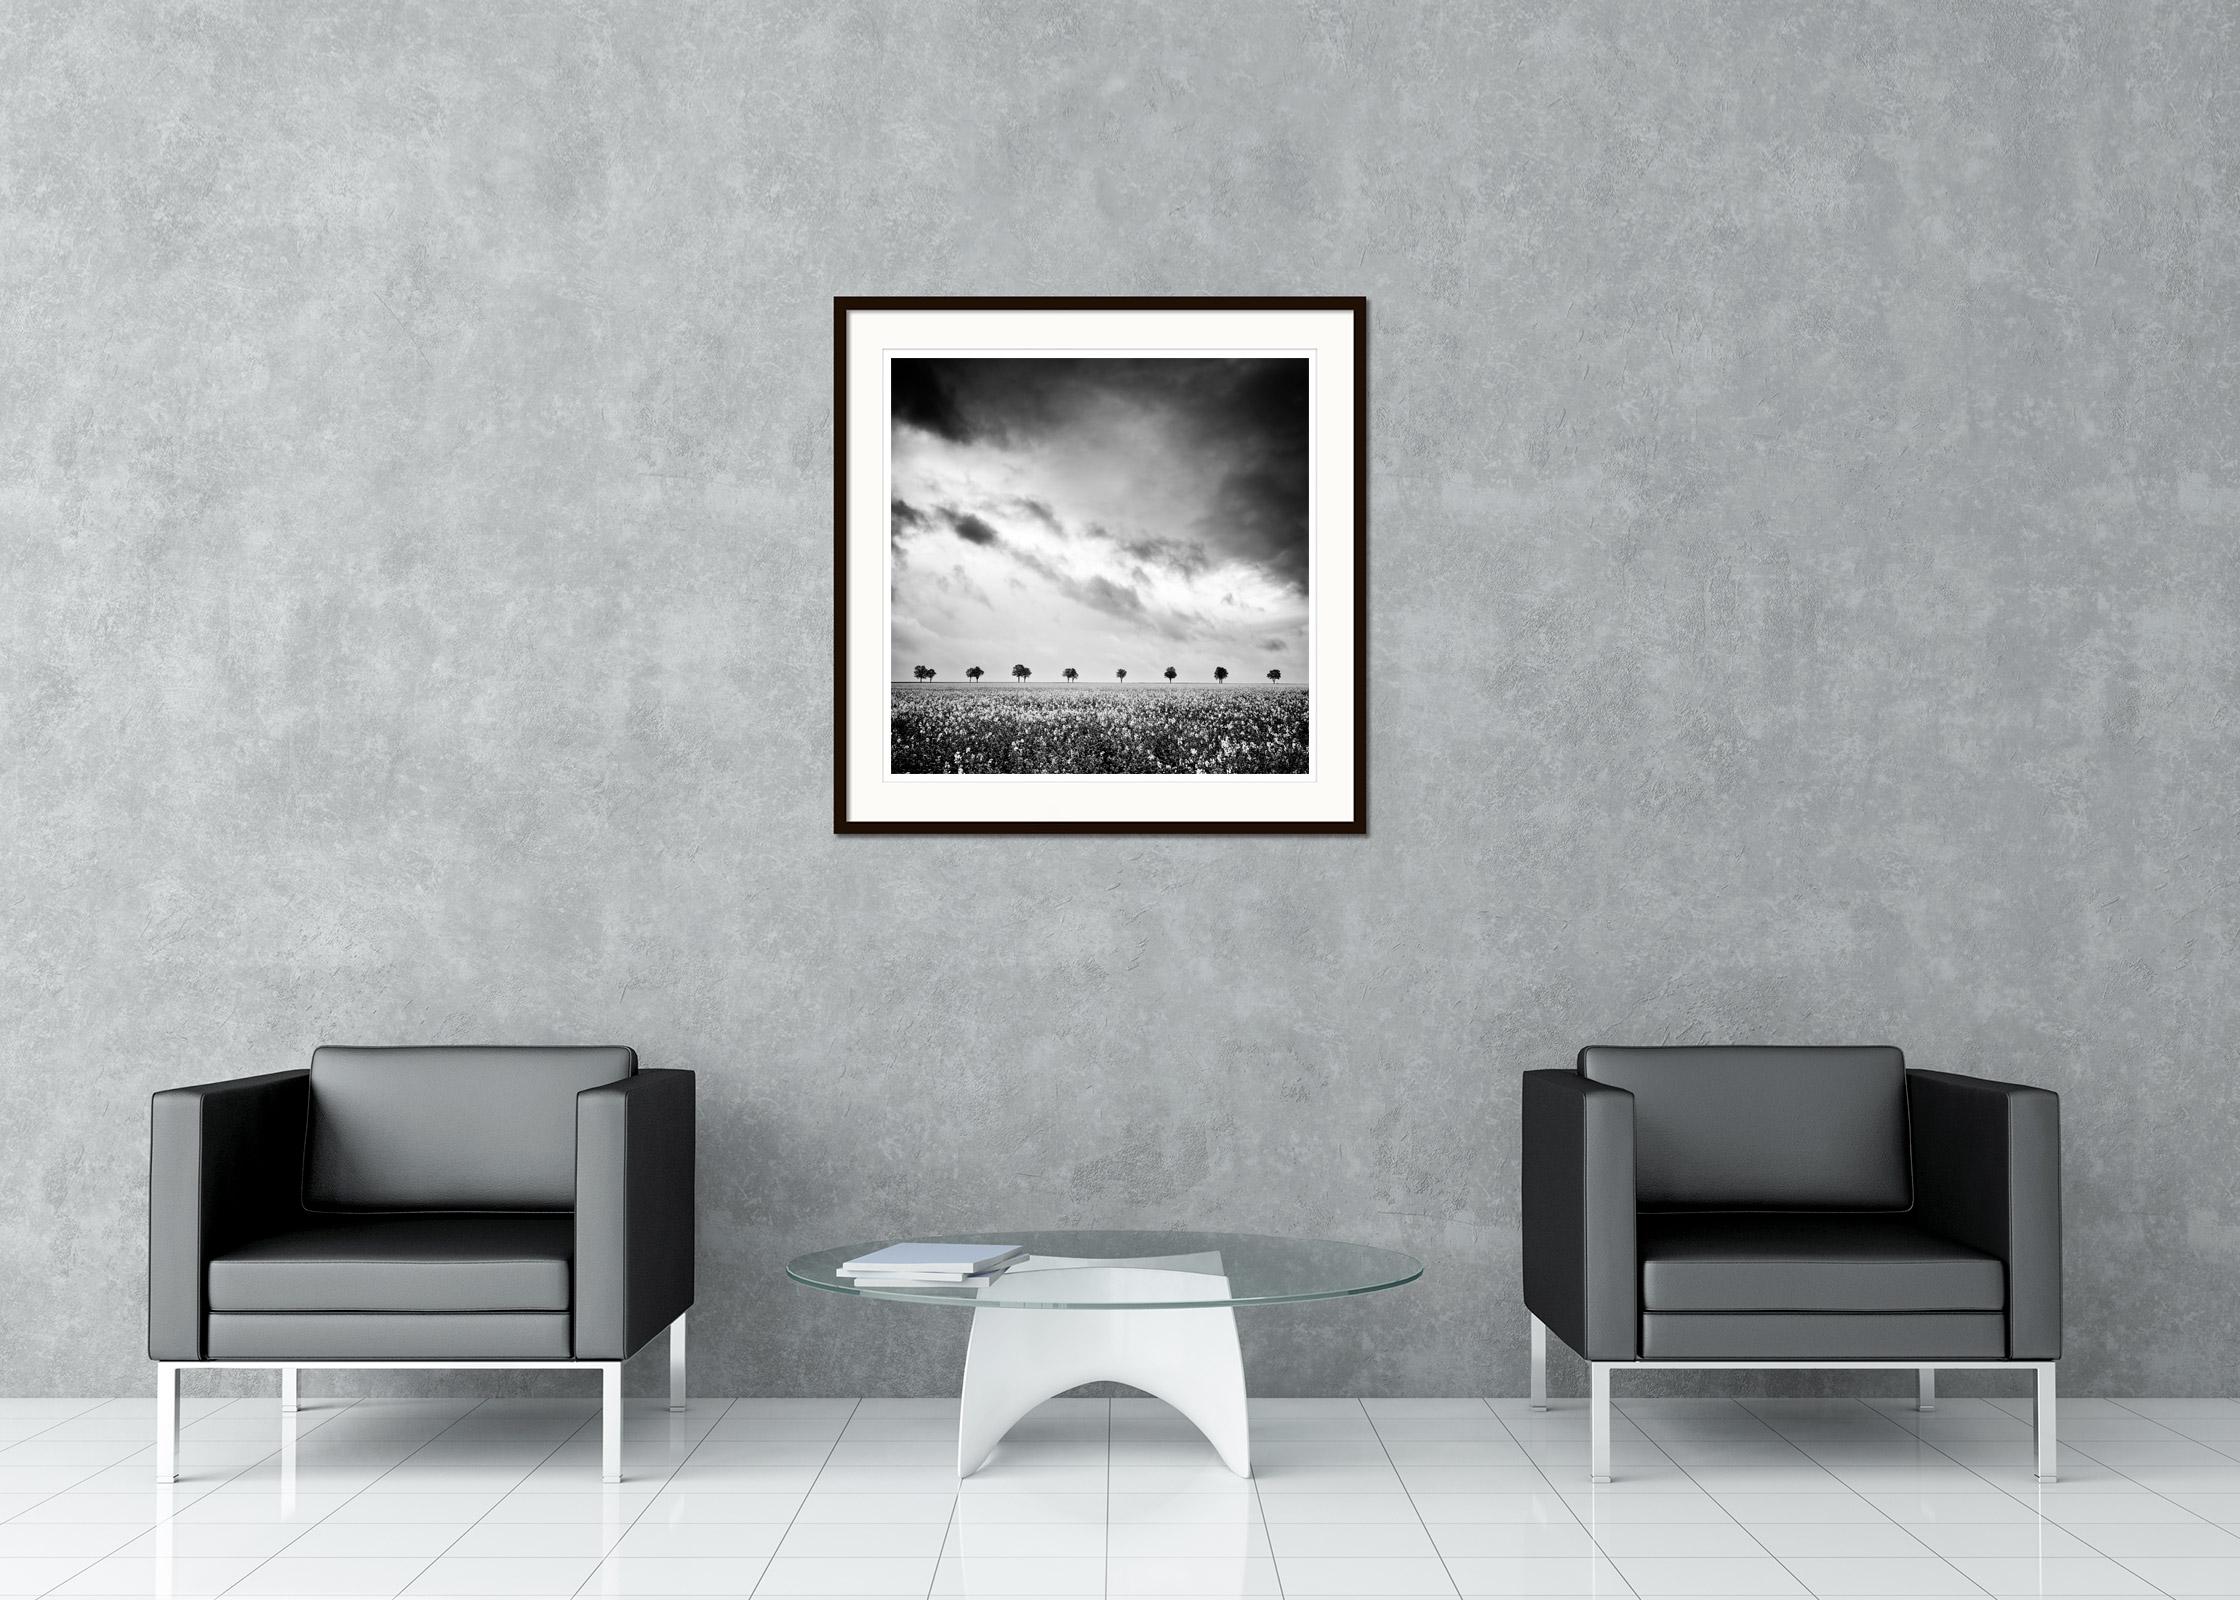 Black and White Fine Art Landscape Photography. Row of trees on the rapeseed field with great cloud mood, France. Archival pigment ink print, edition of 5. Signed, titled, dated and numbered by artist. Certificate of authenticity included. Printed